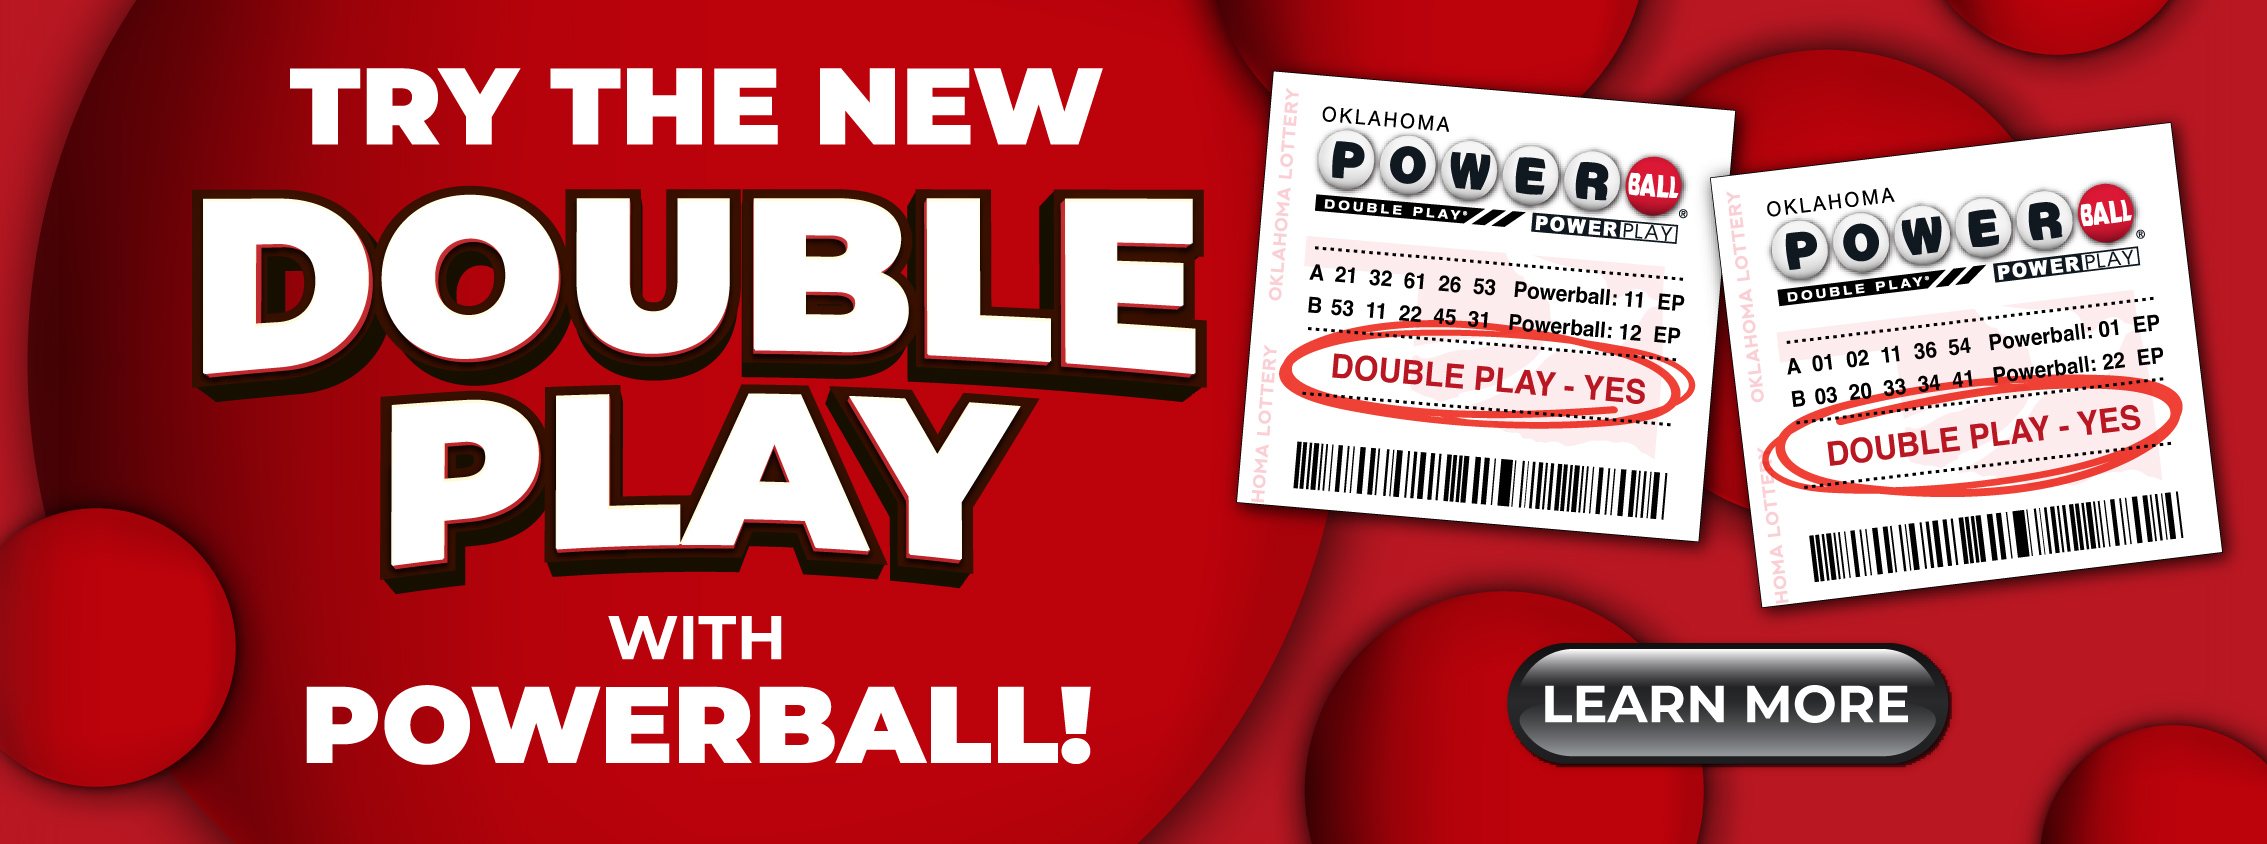 Try the new Double Play!